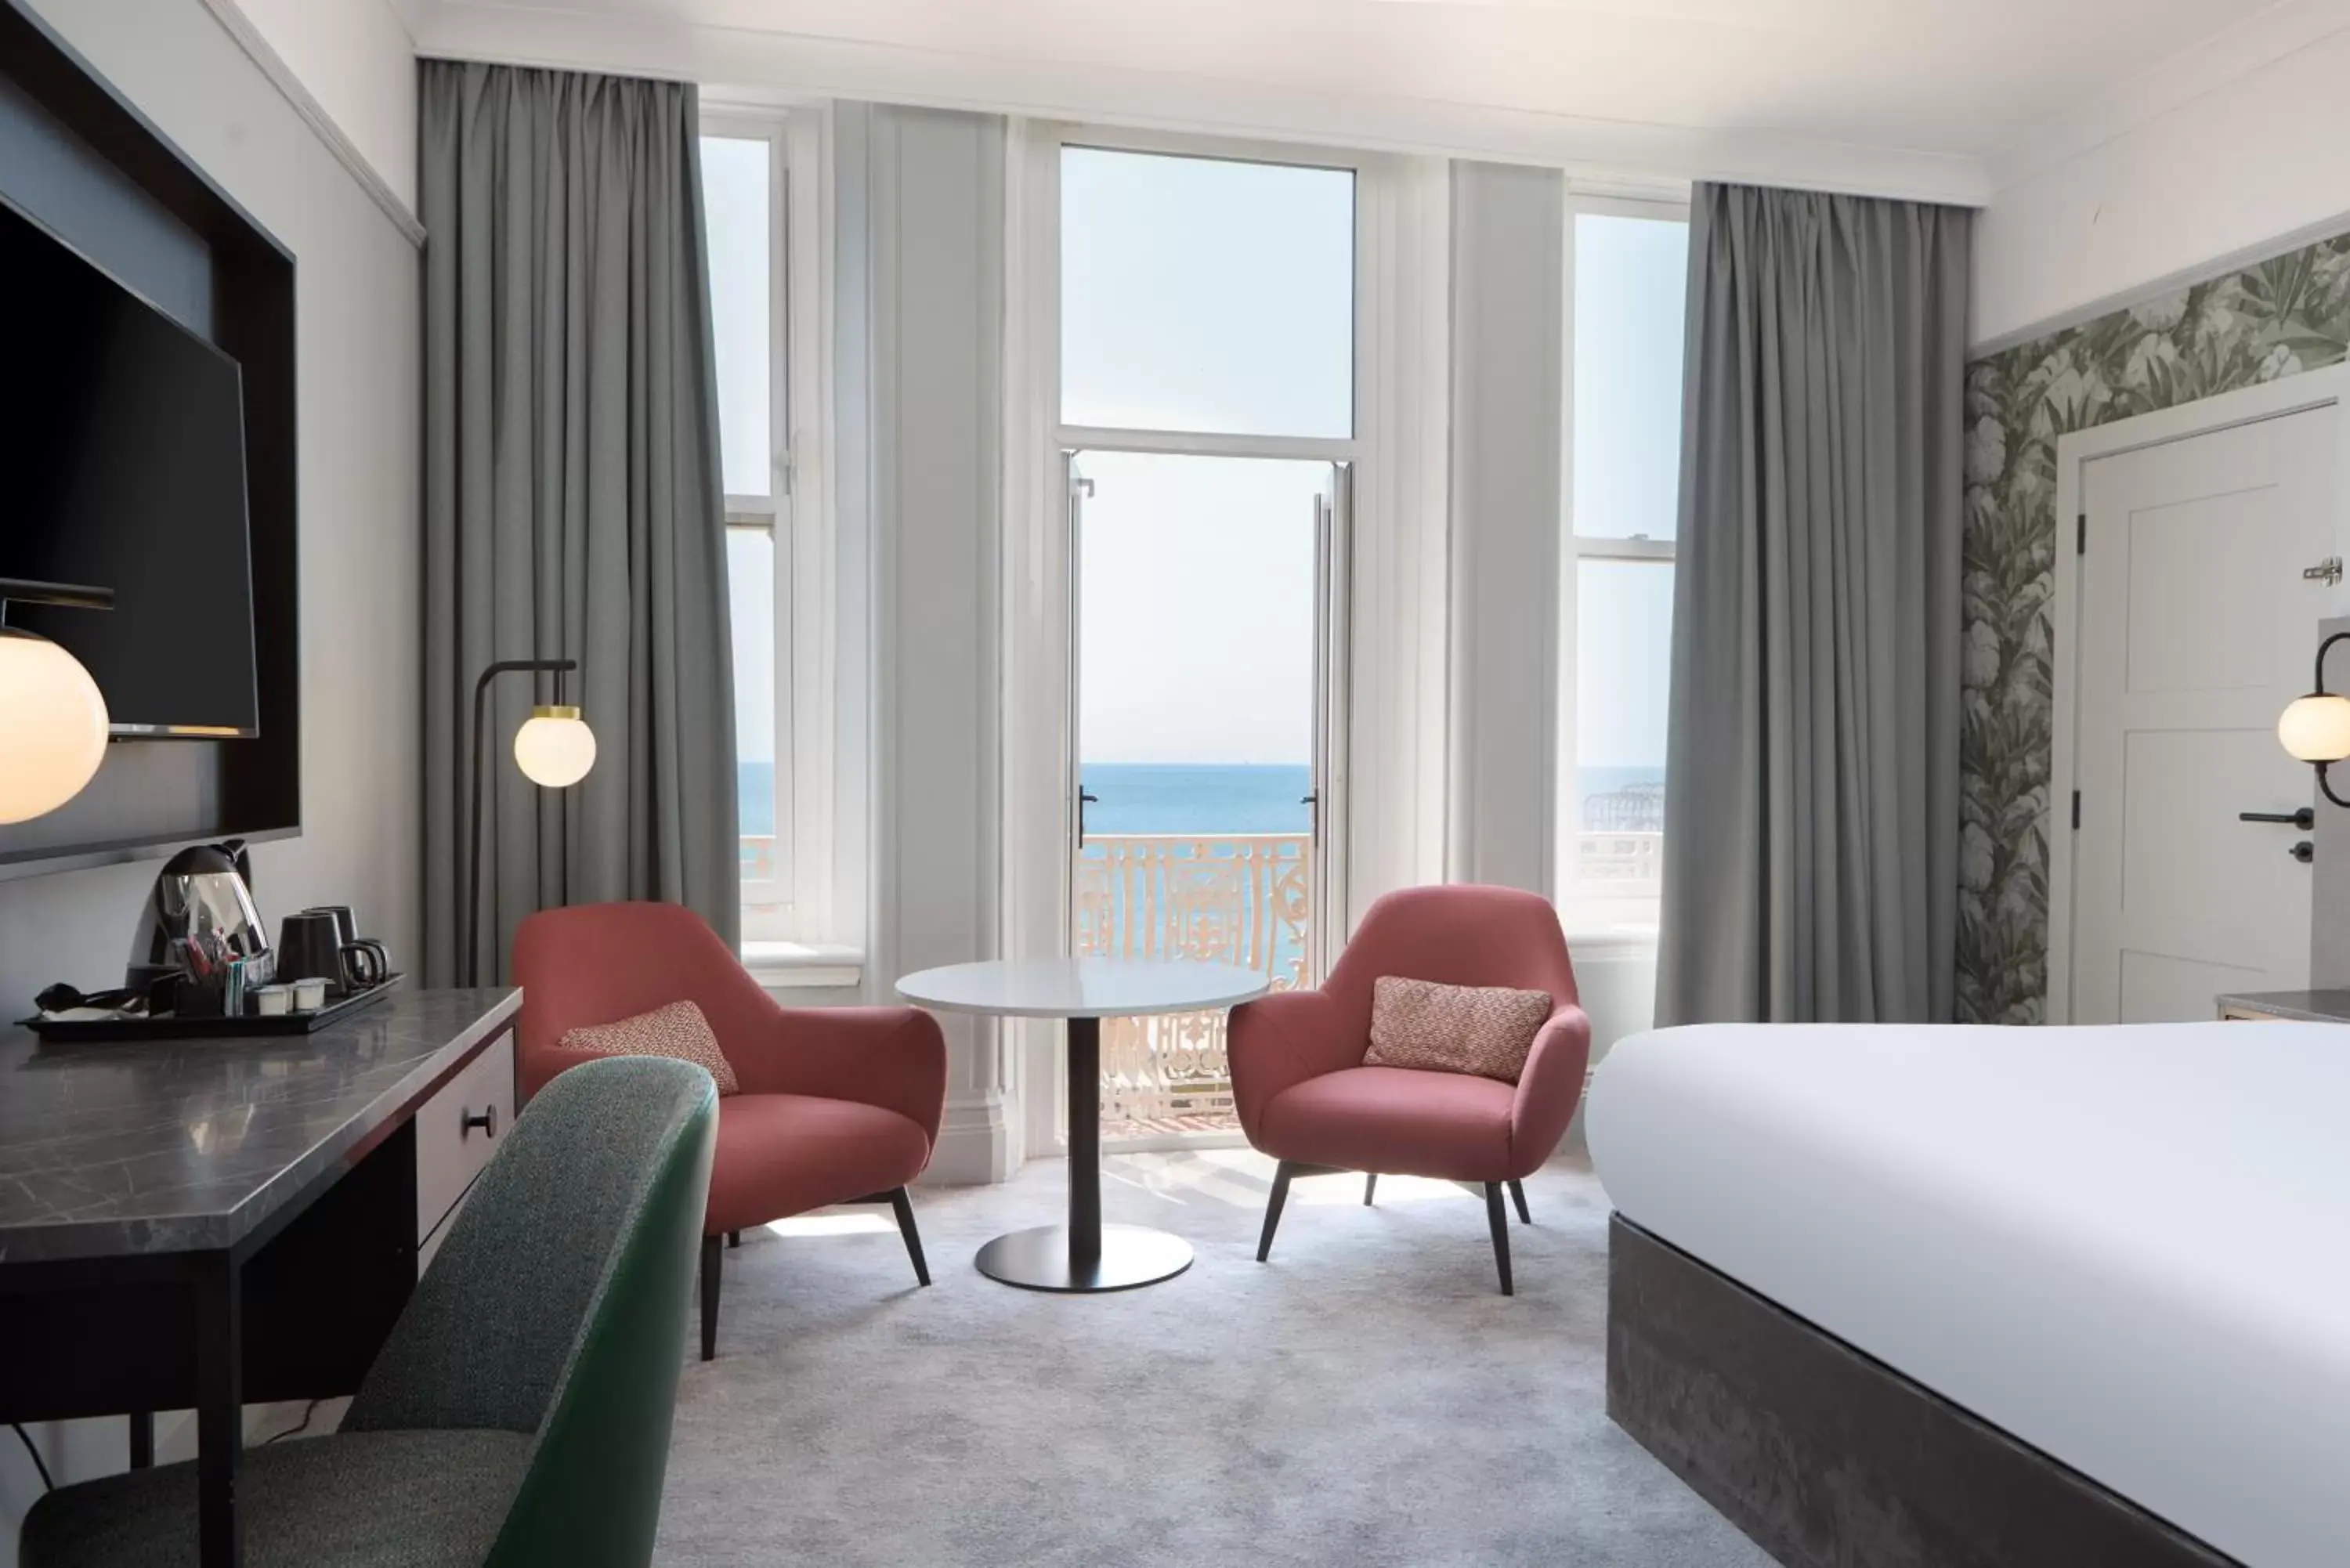 Queen Superior Room with Sea View and Balcony in DoubleTree By Hilton Brighton Metropole